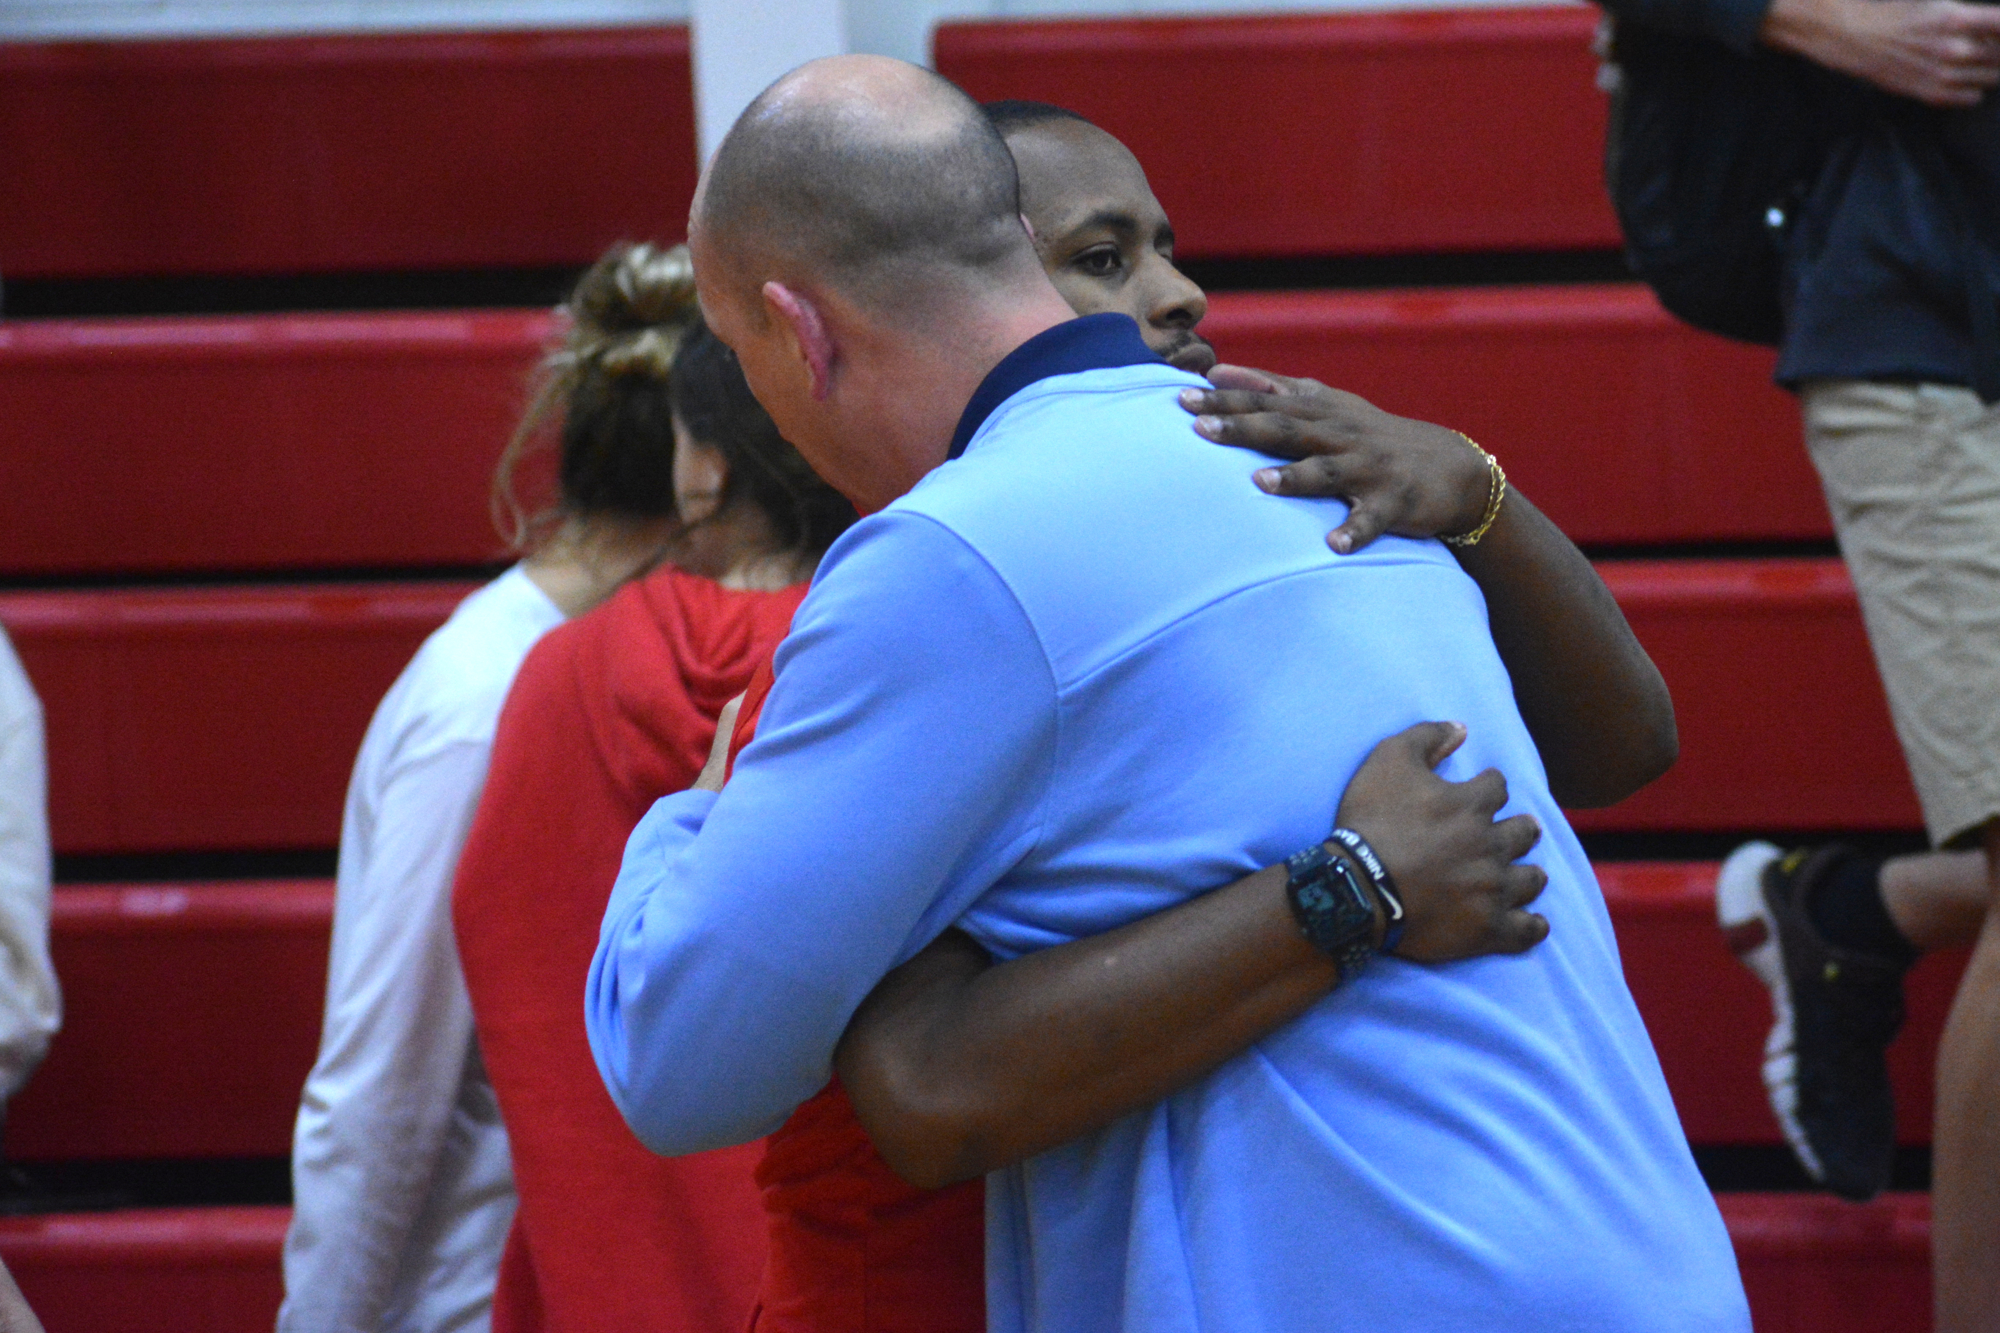 Cardinal Mooney High boys basketball Coach Vince Cherry hugs ODA Coach B.J. Ivey after the two teams played each other. Cherry played for Ivey at Riverview High.